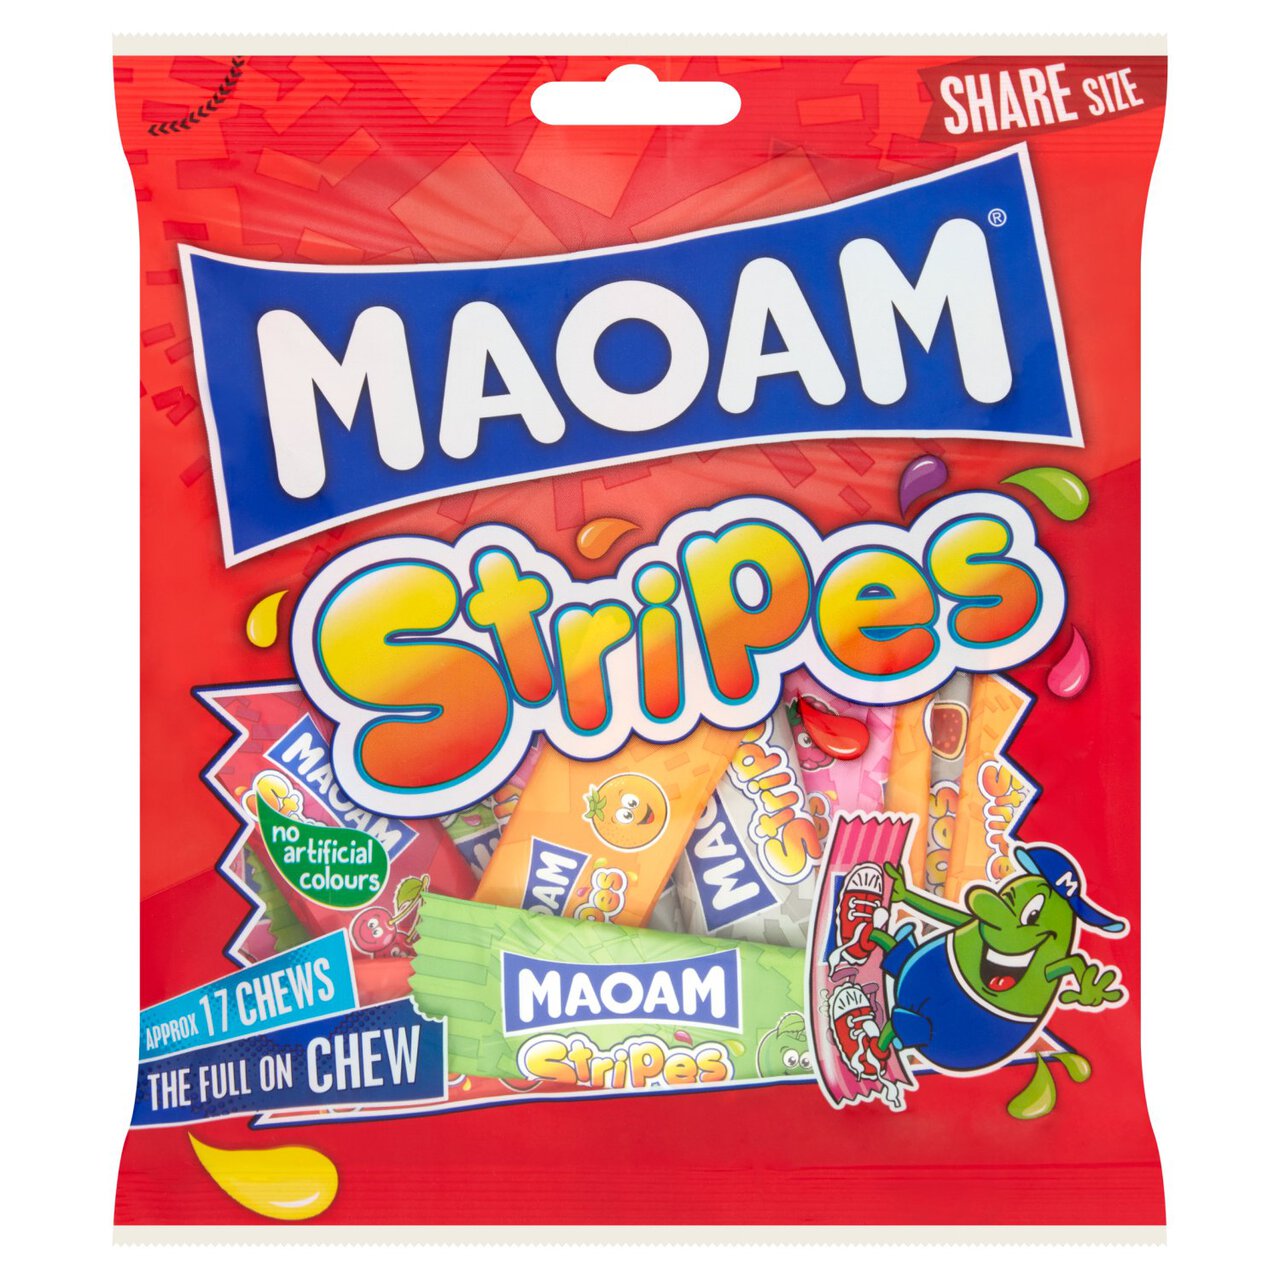 Maoam Stripes Chewy Wrapped Sweets Sharing Bag 140g 140g